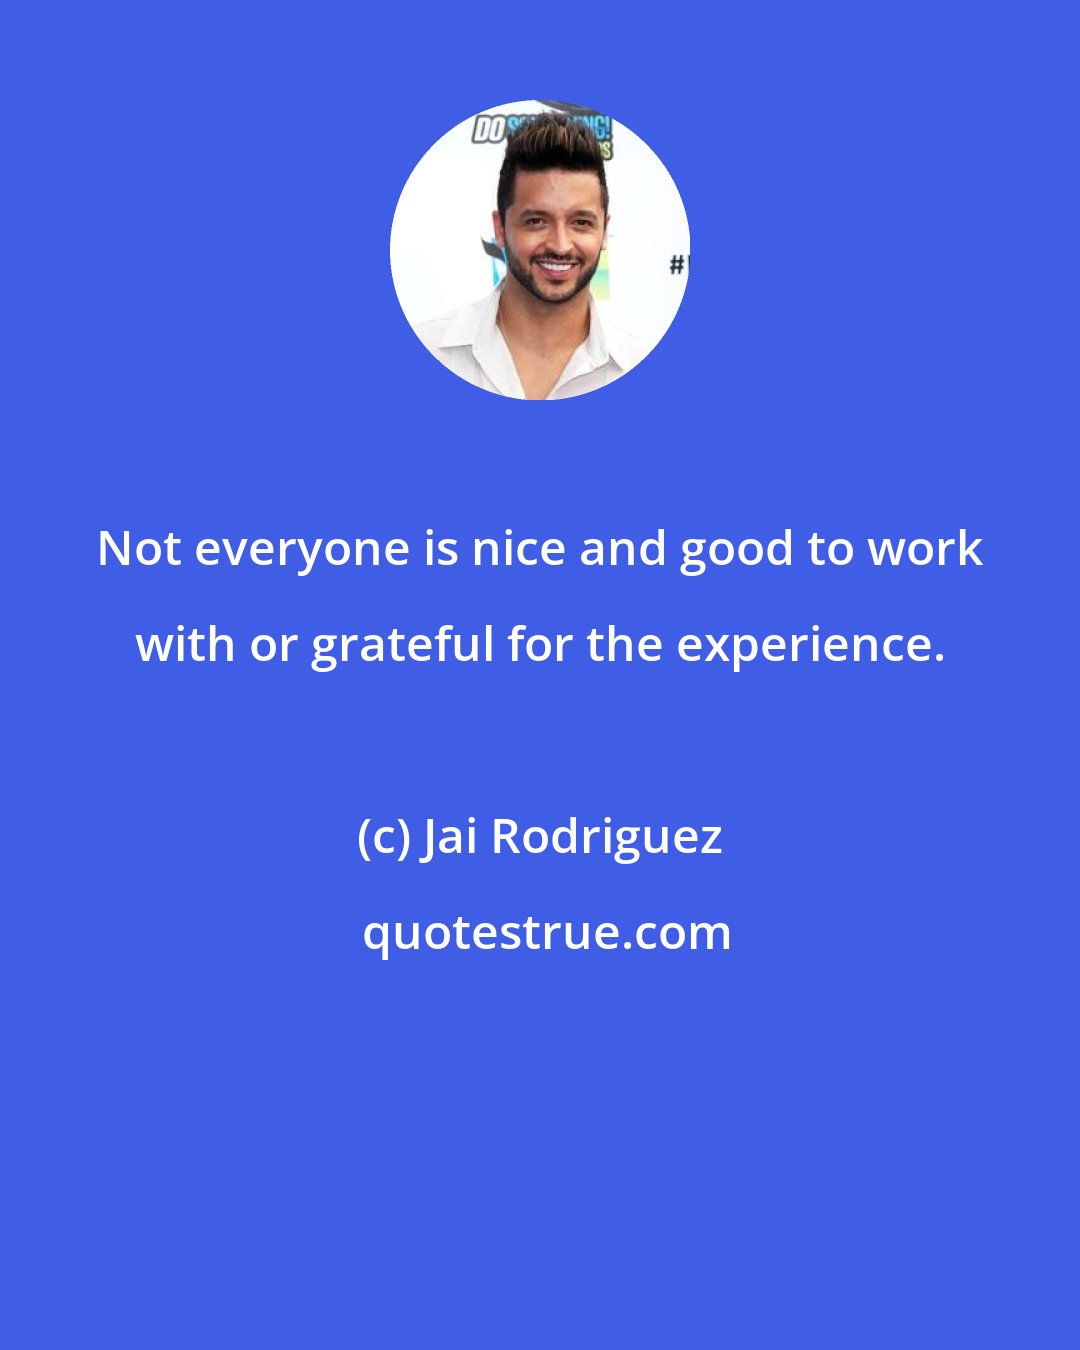 Jai Rodriguez: Not everyone is nice and good to work with or grateful for the experience.